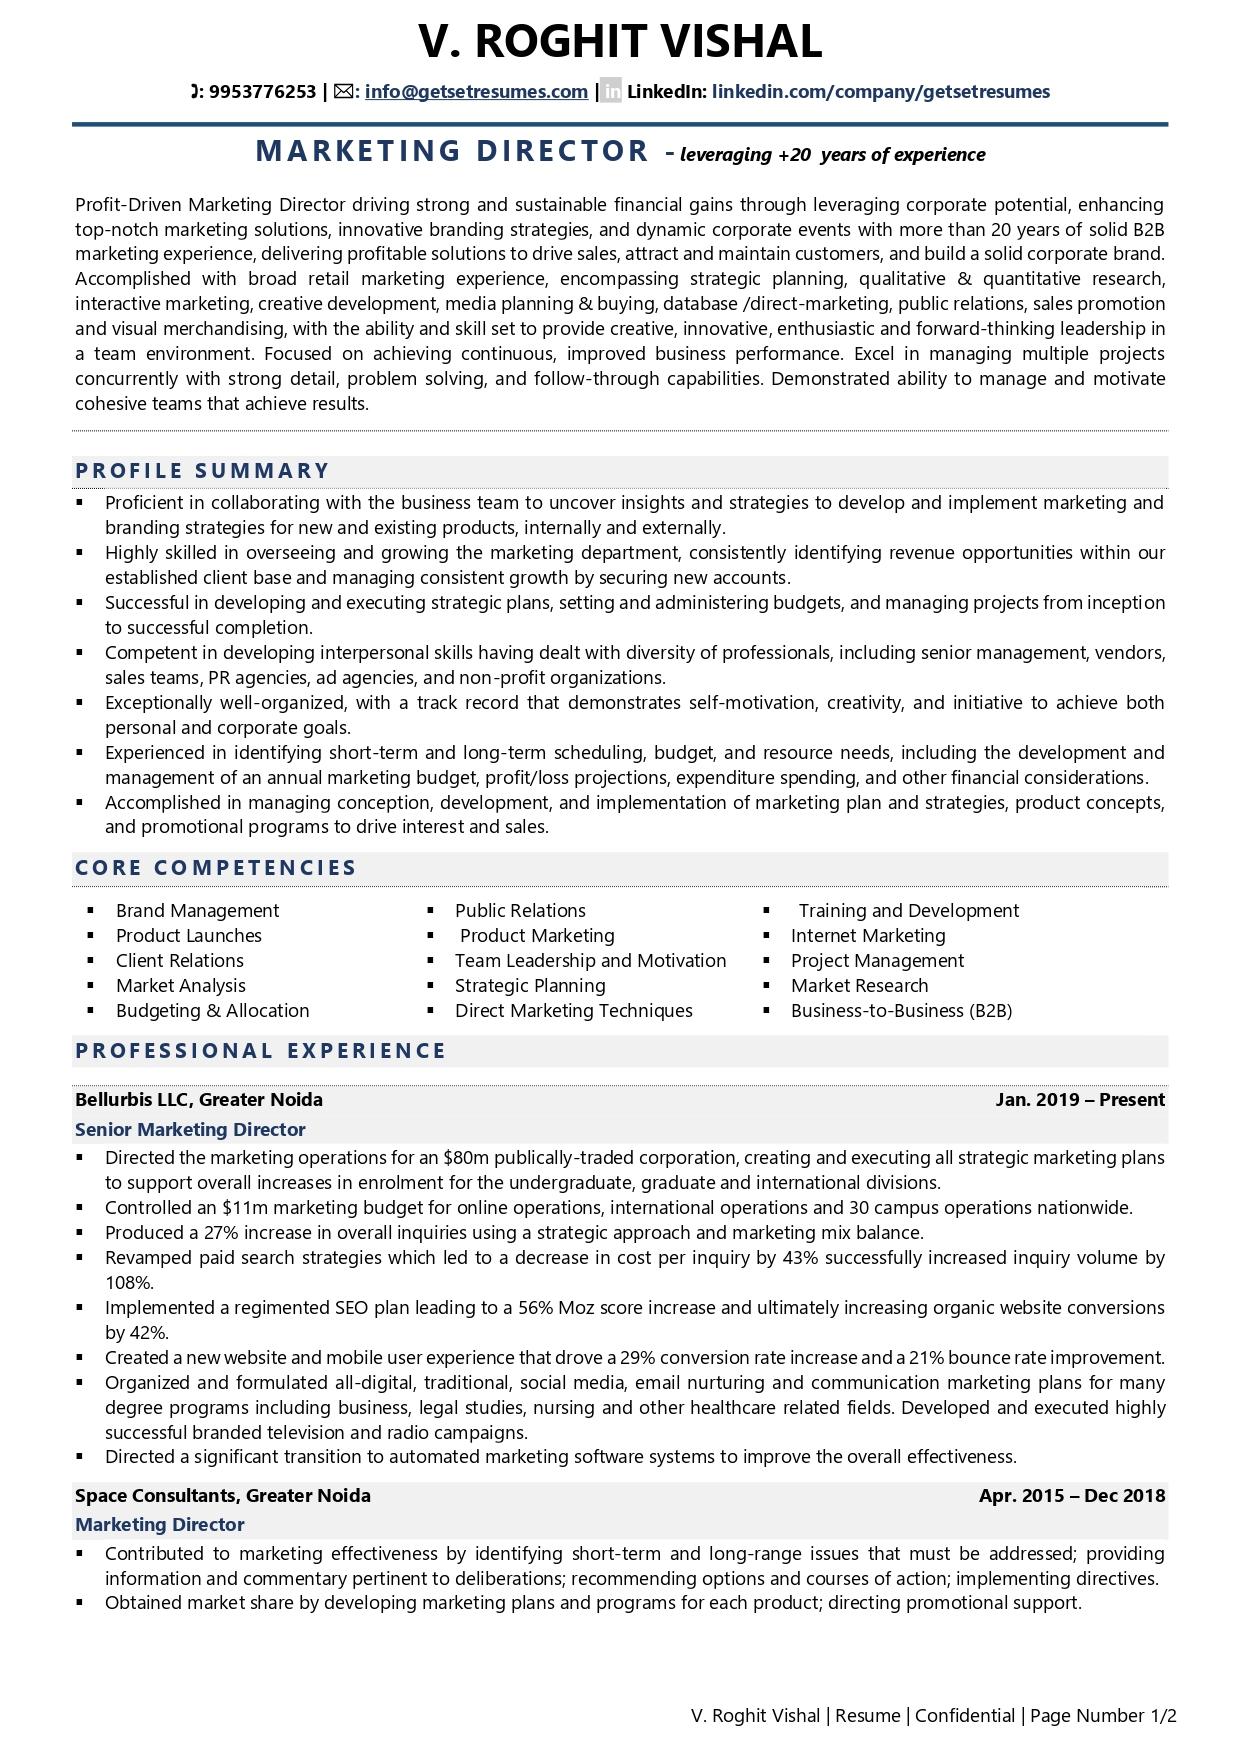 Marketing Director - Resume Example & Template